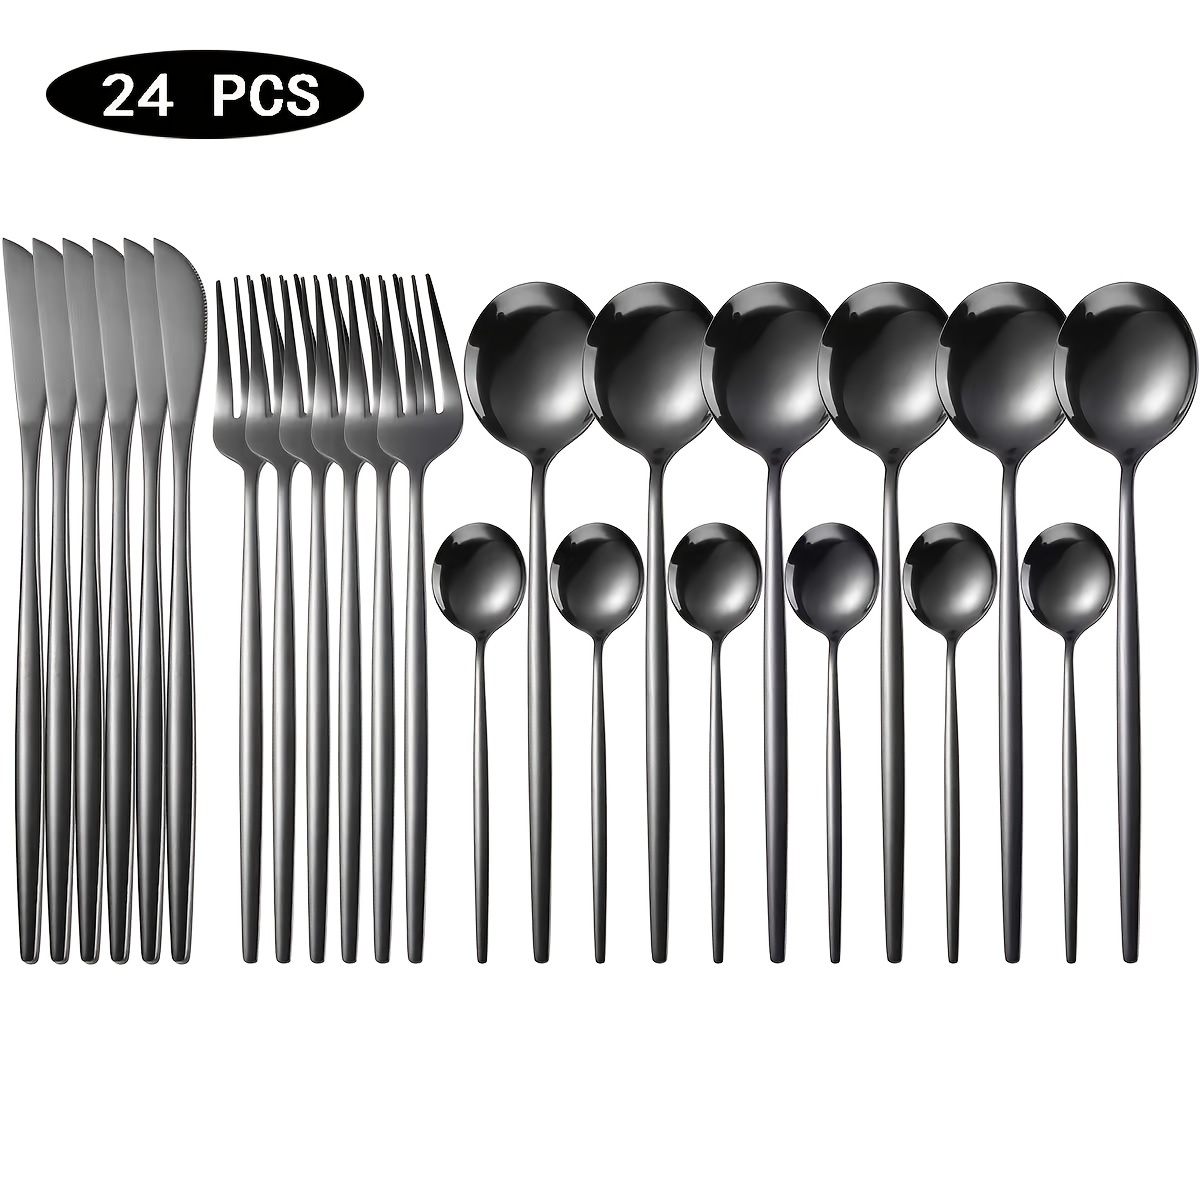 20 Piece Silverware Set Service for 4,Premium Stainless Steel Flatware  Set,Mirror Polished Cutlery Utensil Set,Durable Home Kitchen Eating  Tableware